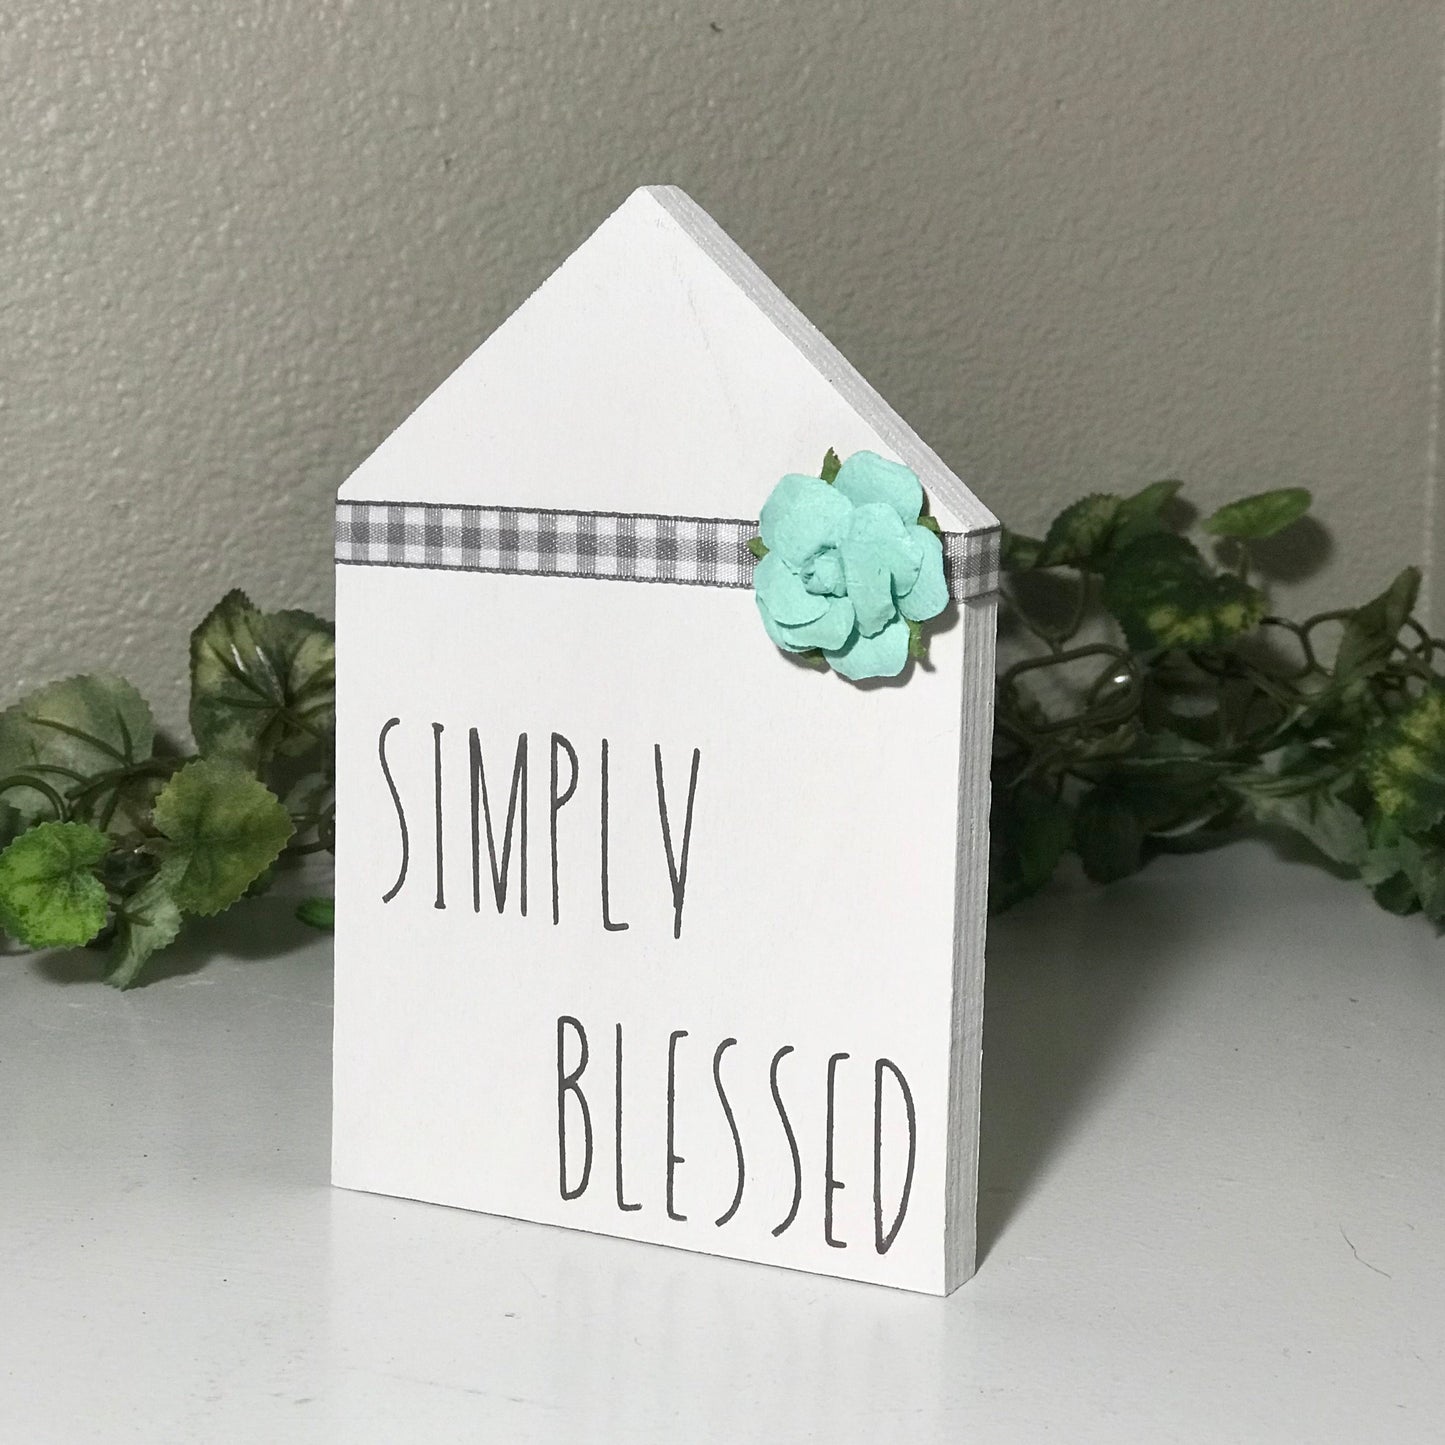 mini house shelf sitter, simply blessed, gray white teal, tiered tray sign, wood home